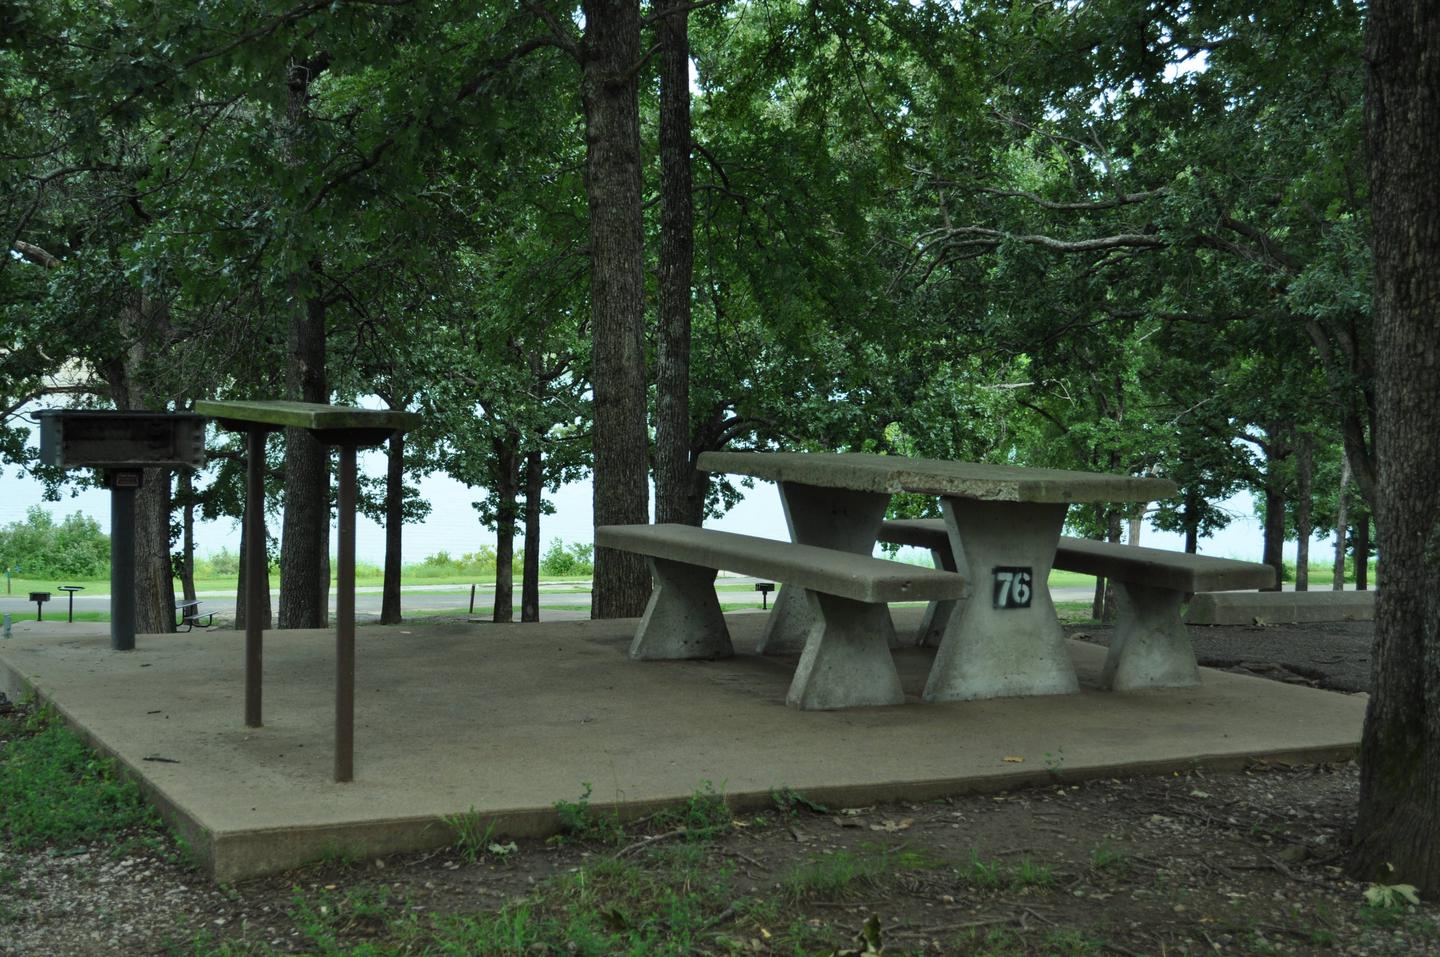 A concrete impact pad with concrete table, pedestal grill and utility table are offered.Site 76 - Taylor Ferry